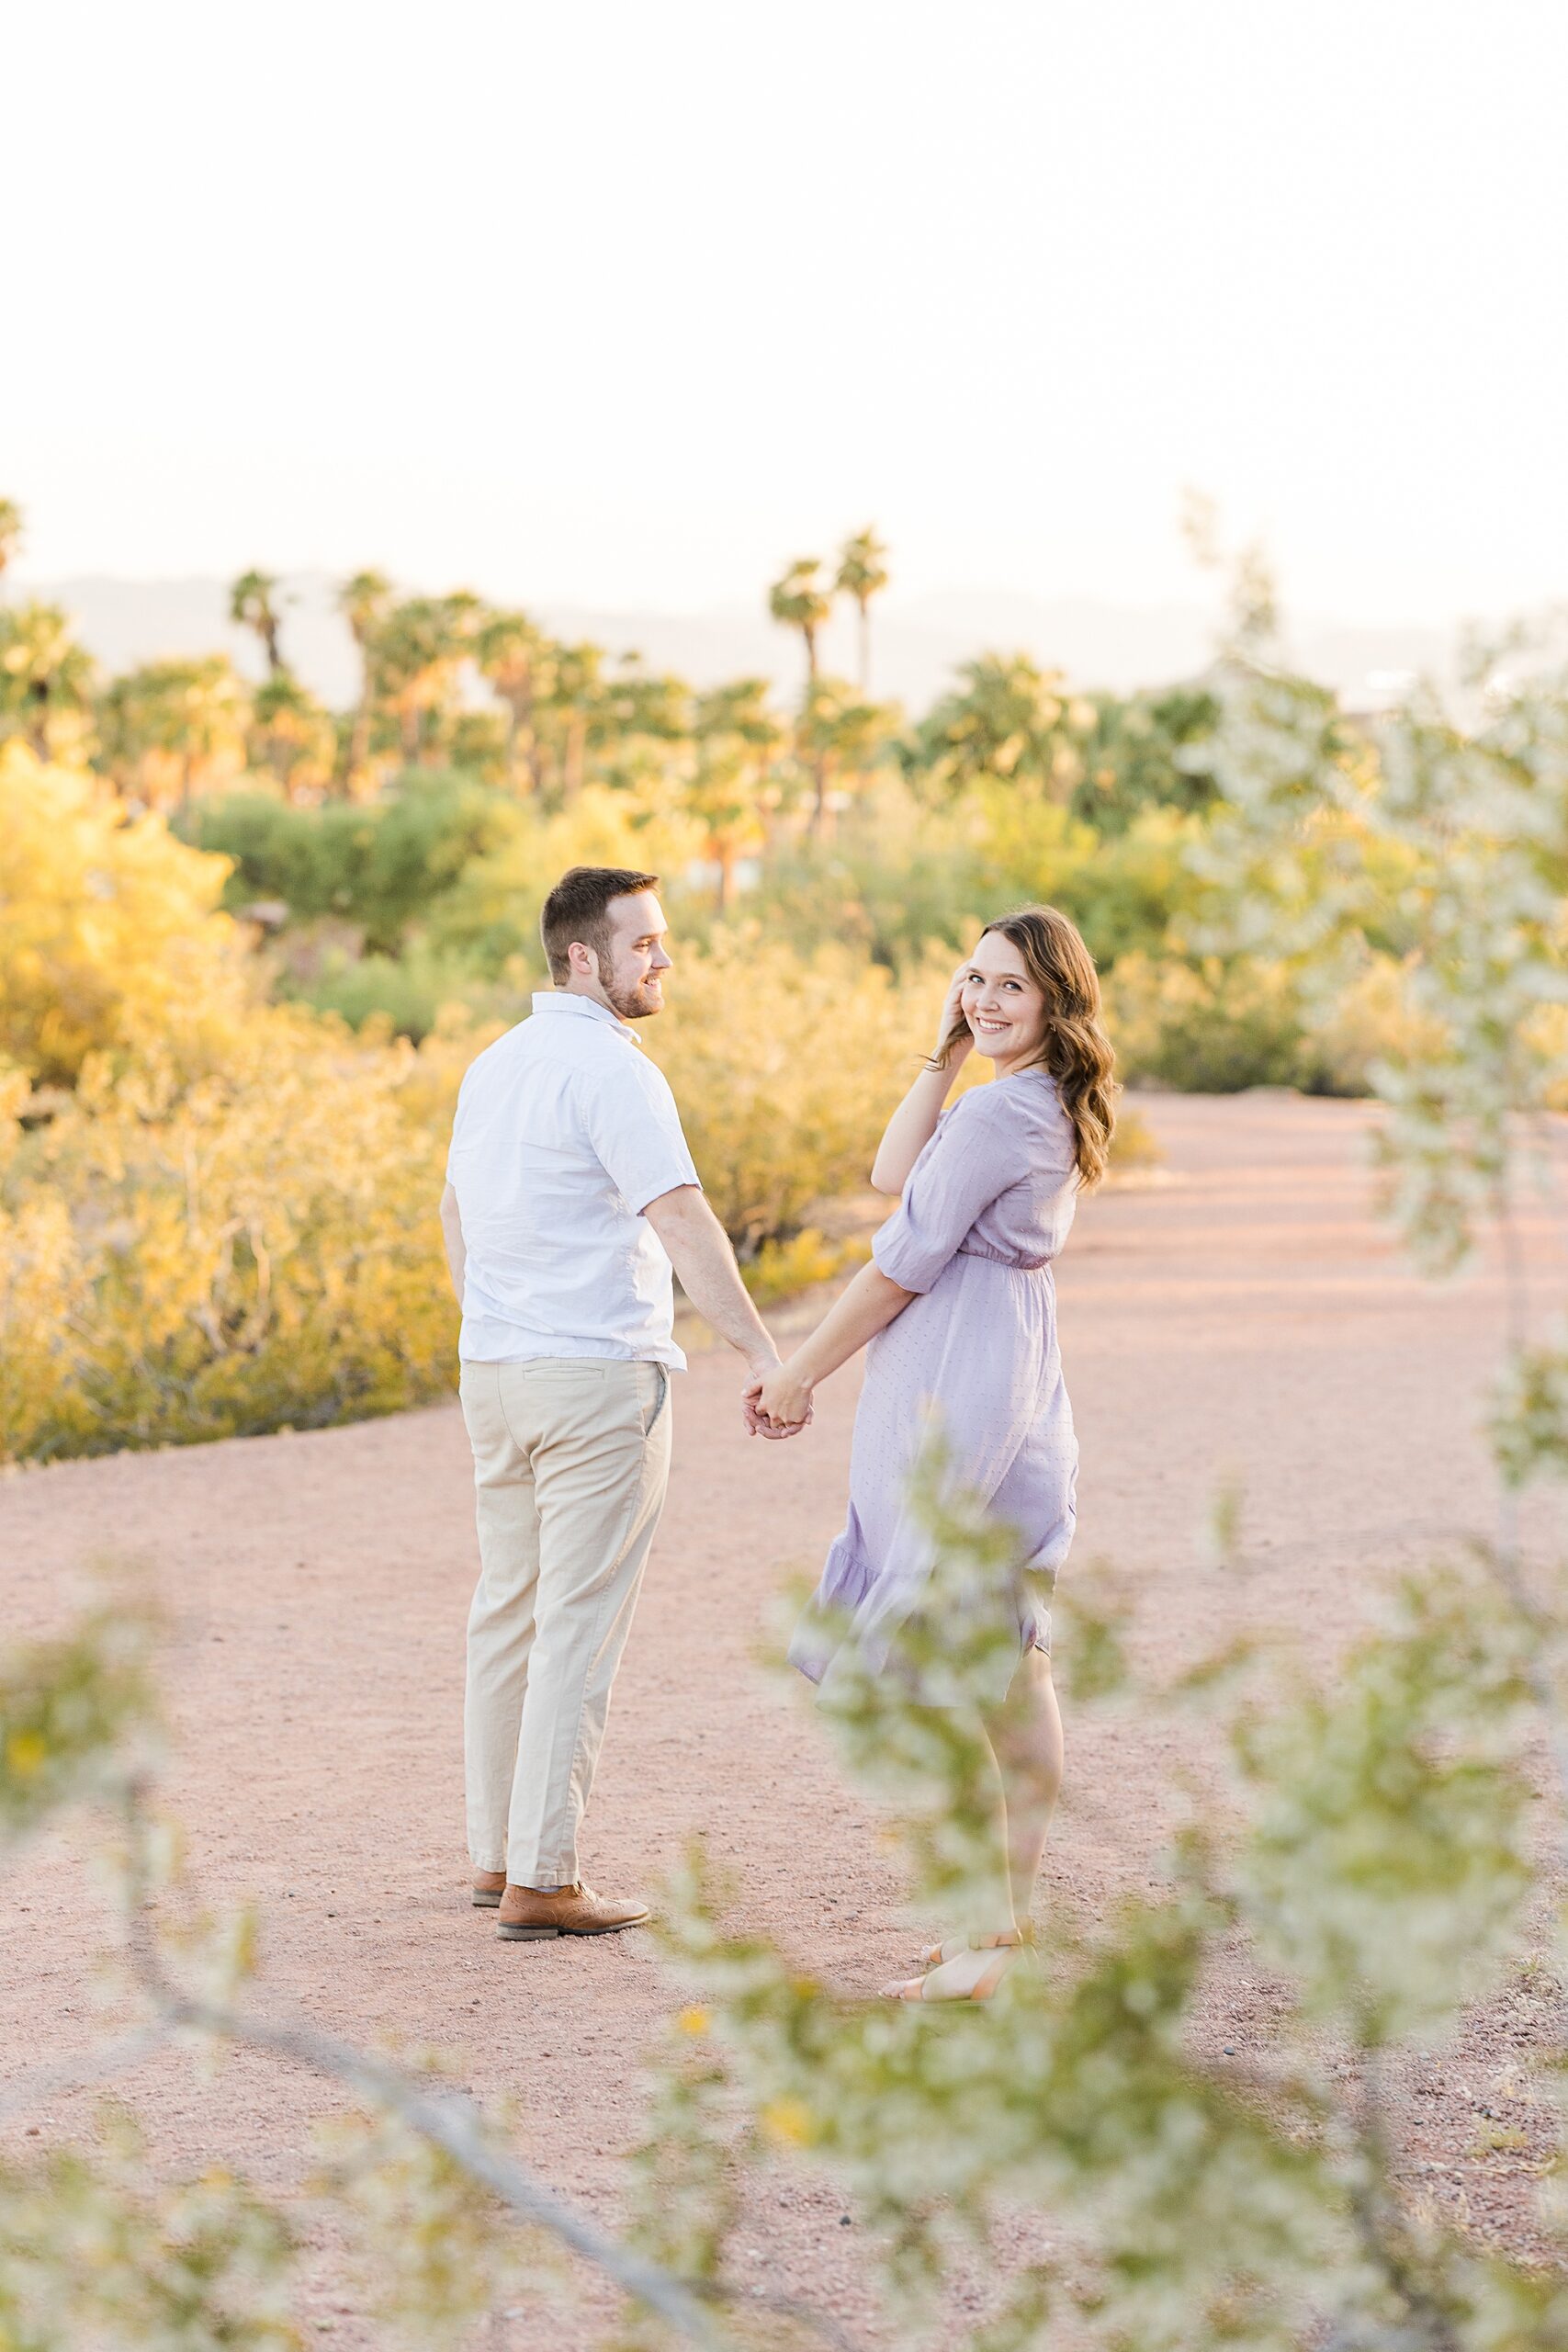 A lovely moment of the couple walking hand in hand during their engagement session at Papago Park
